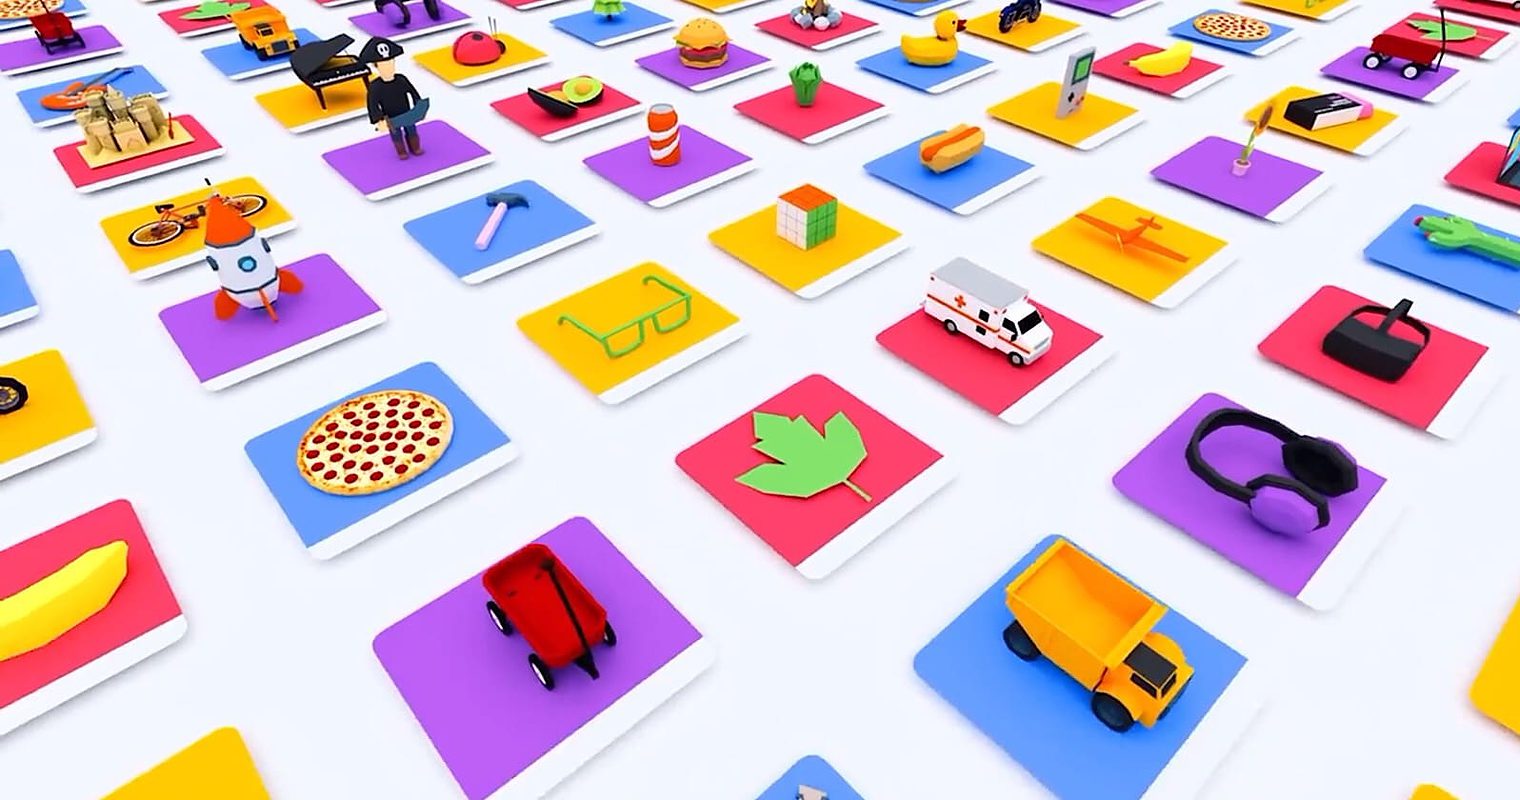 Google Created a Search Engine for Finding 3D Objects to Use in Apps